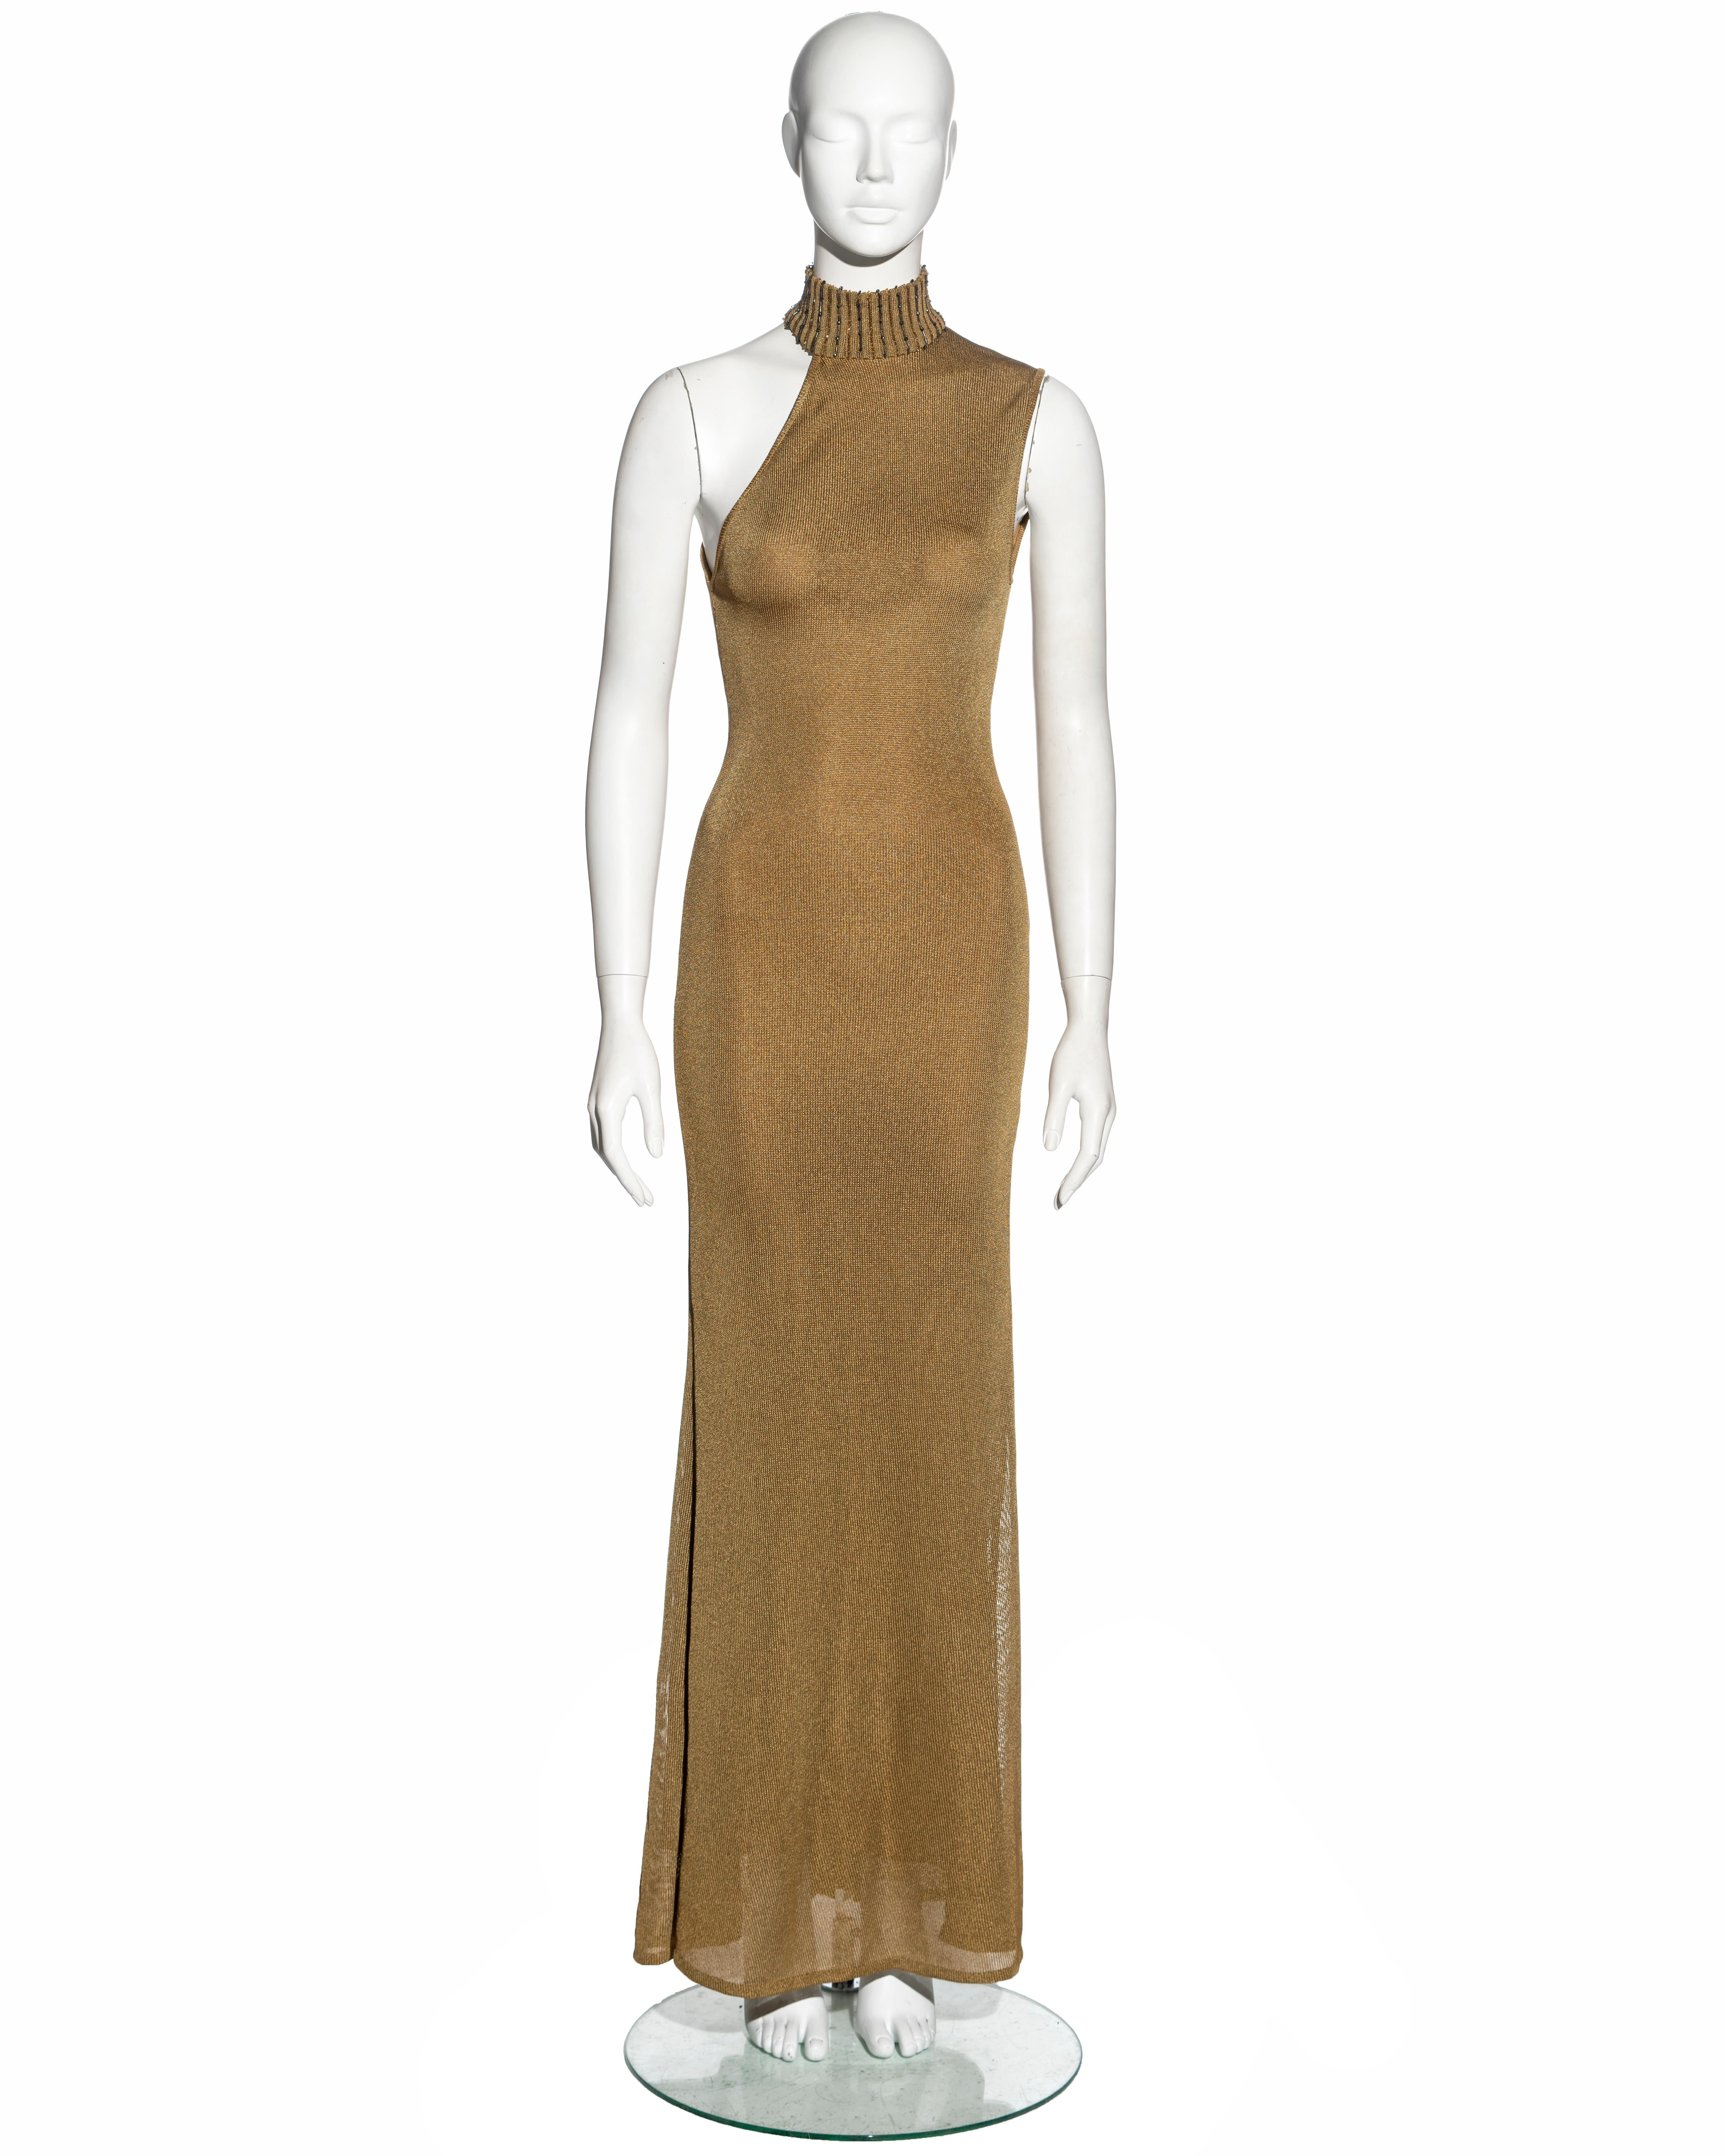 ▪ Gianni Versace evening dress
▪ Constructed from gold knitted rayon
▪ Turtleneck with embellished with vertical rows of bugle beads
▪ Asymmetric neckline
▪ Floor-length skirt 
▪ Lined
▪ Fall-Winter 1996
▪ Size 38
▪ Made in Italy  

All photographs